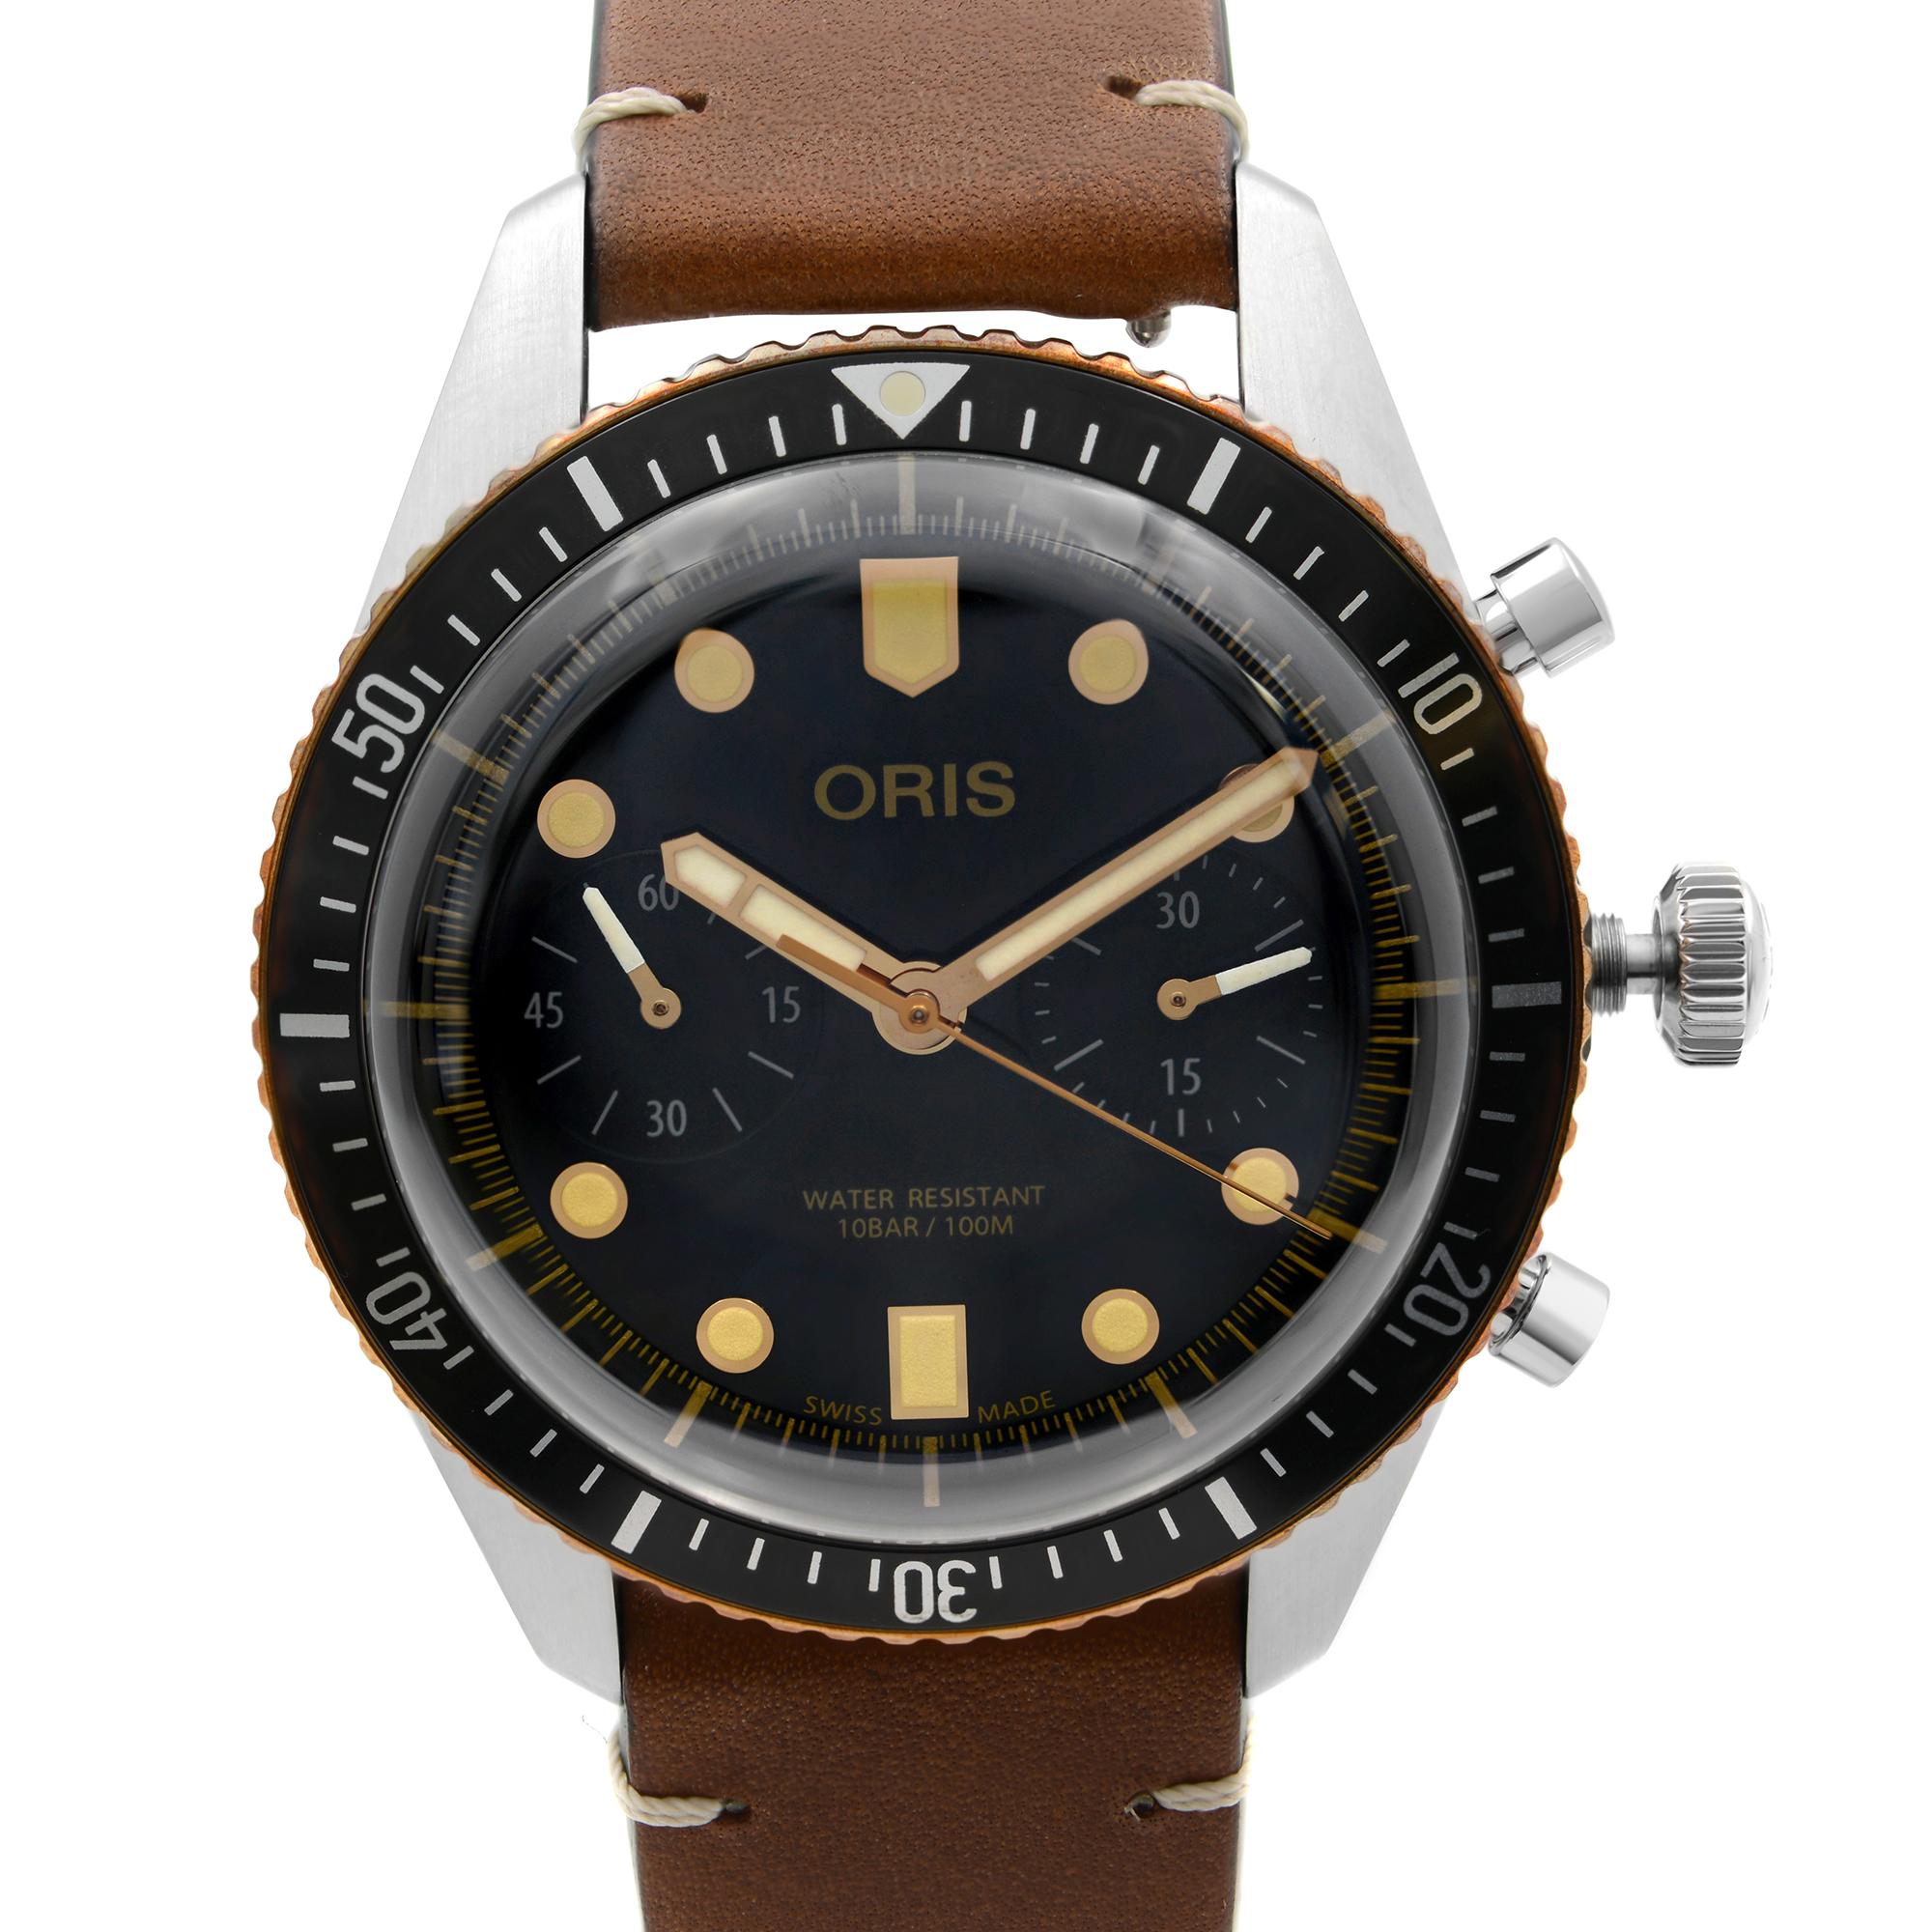 Display Model Oris Diver Sixty-Five Steel Bronze Chronograph Black Dial Watch 01 771 7744 4354-07 5 21 45. This Beautiful Timepiece is Powered by Mechanical (Automatic) Movement And Features: Round Stainless Steel Case with a Two Piece Brown Leather